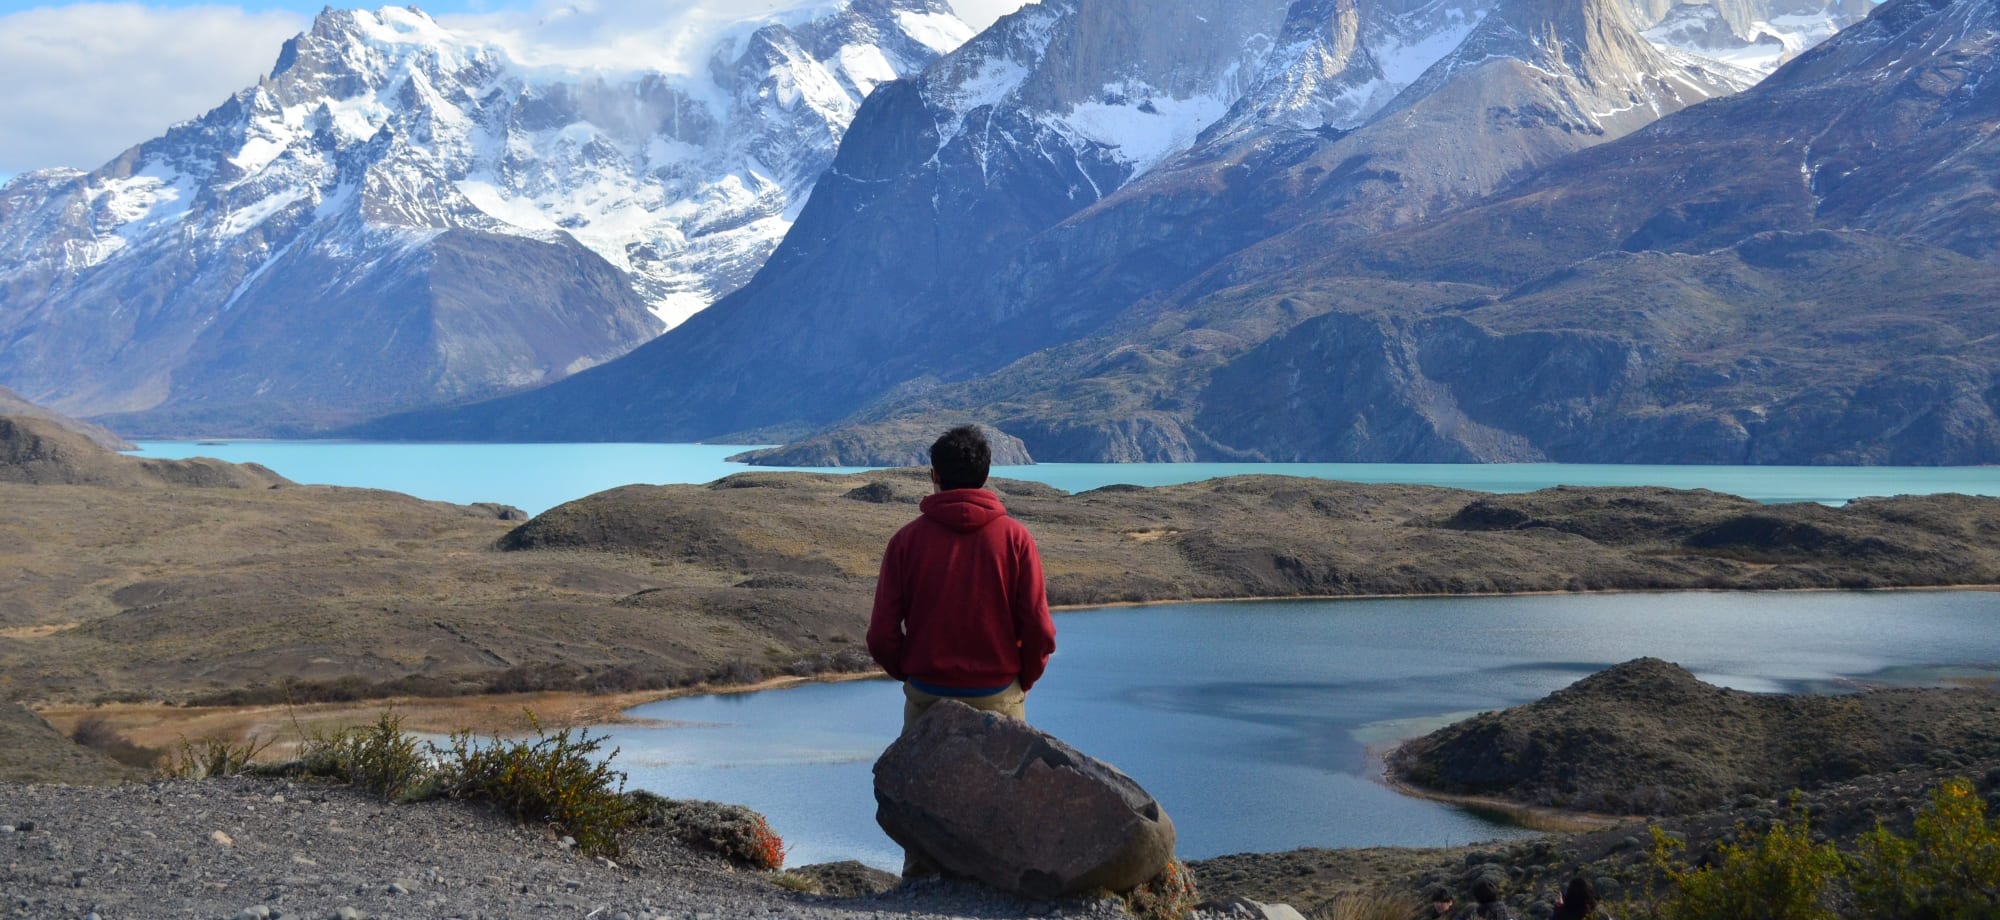 A man is standing in front of a lake and snow-capped mountains. 